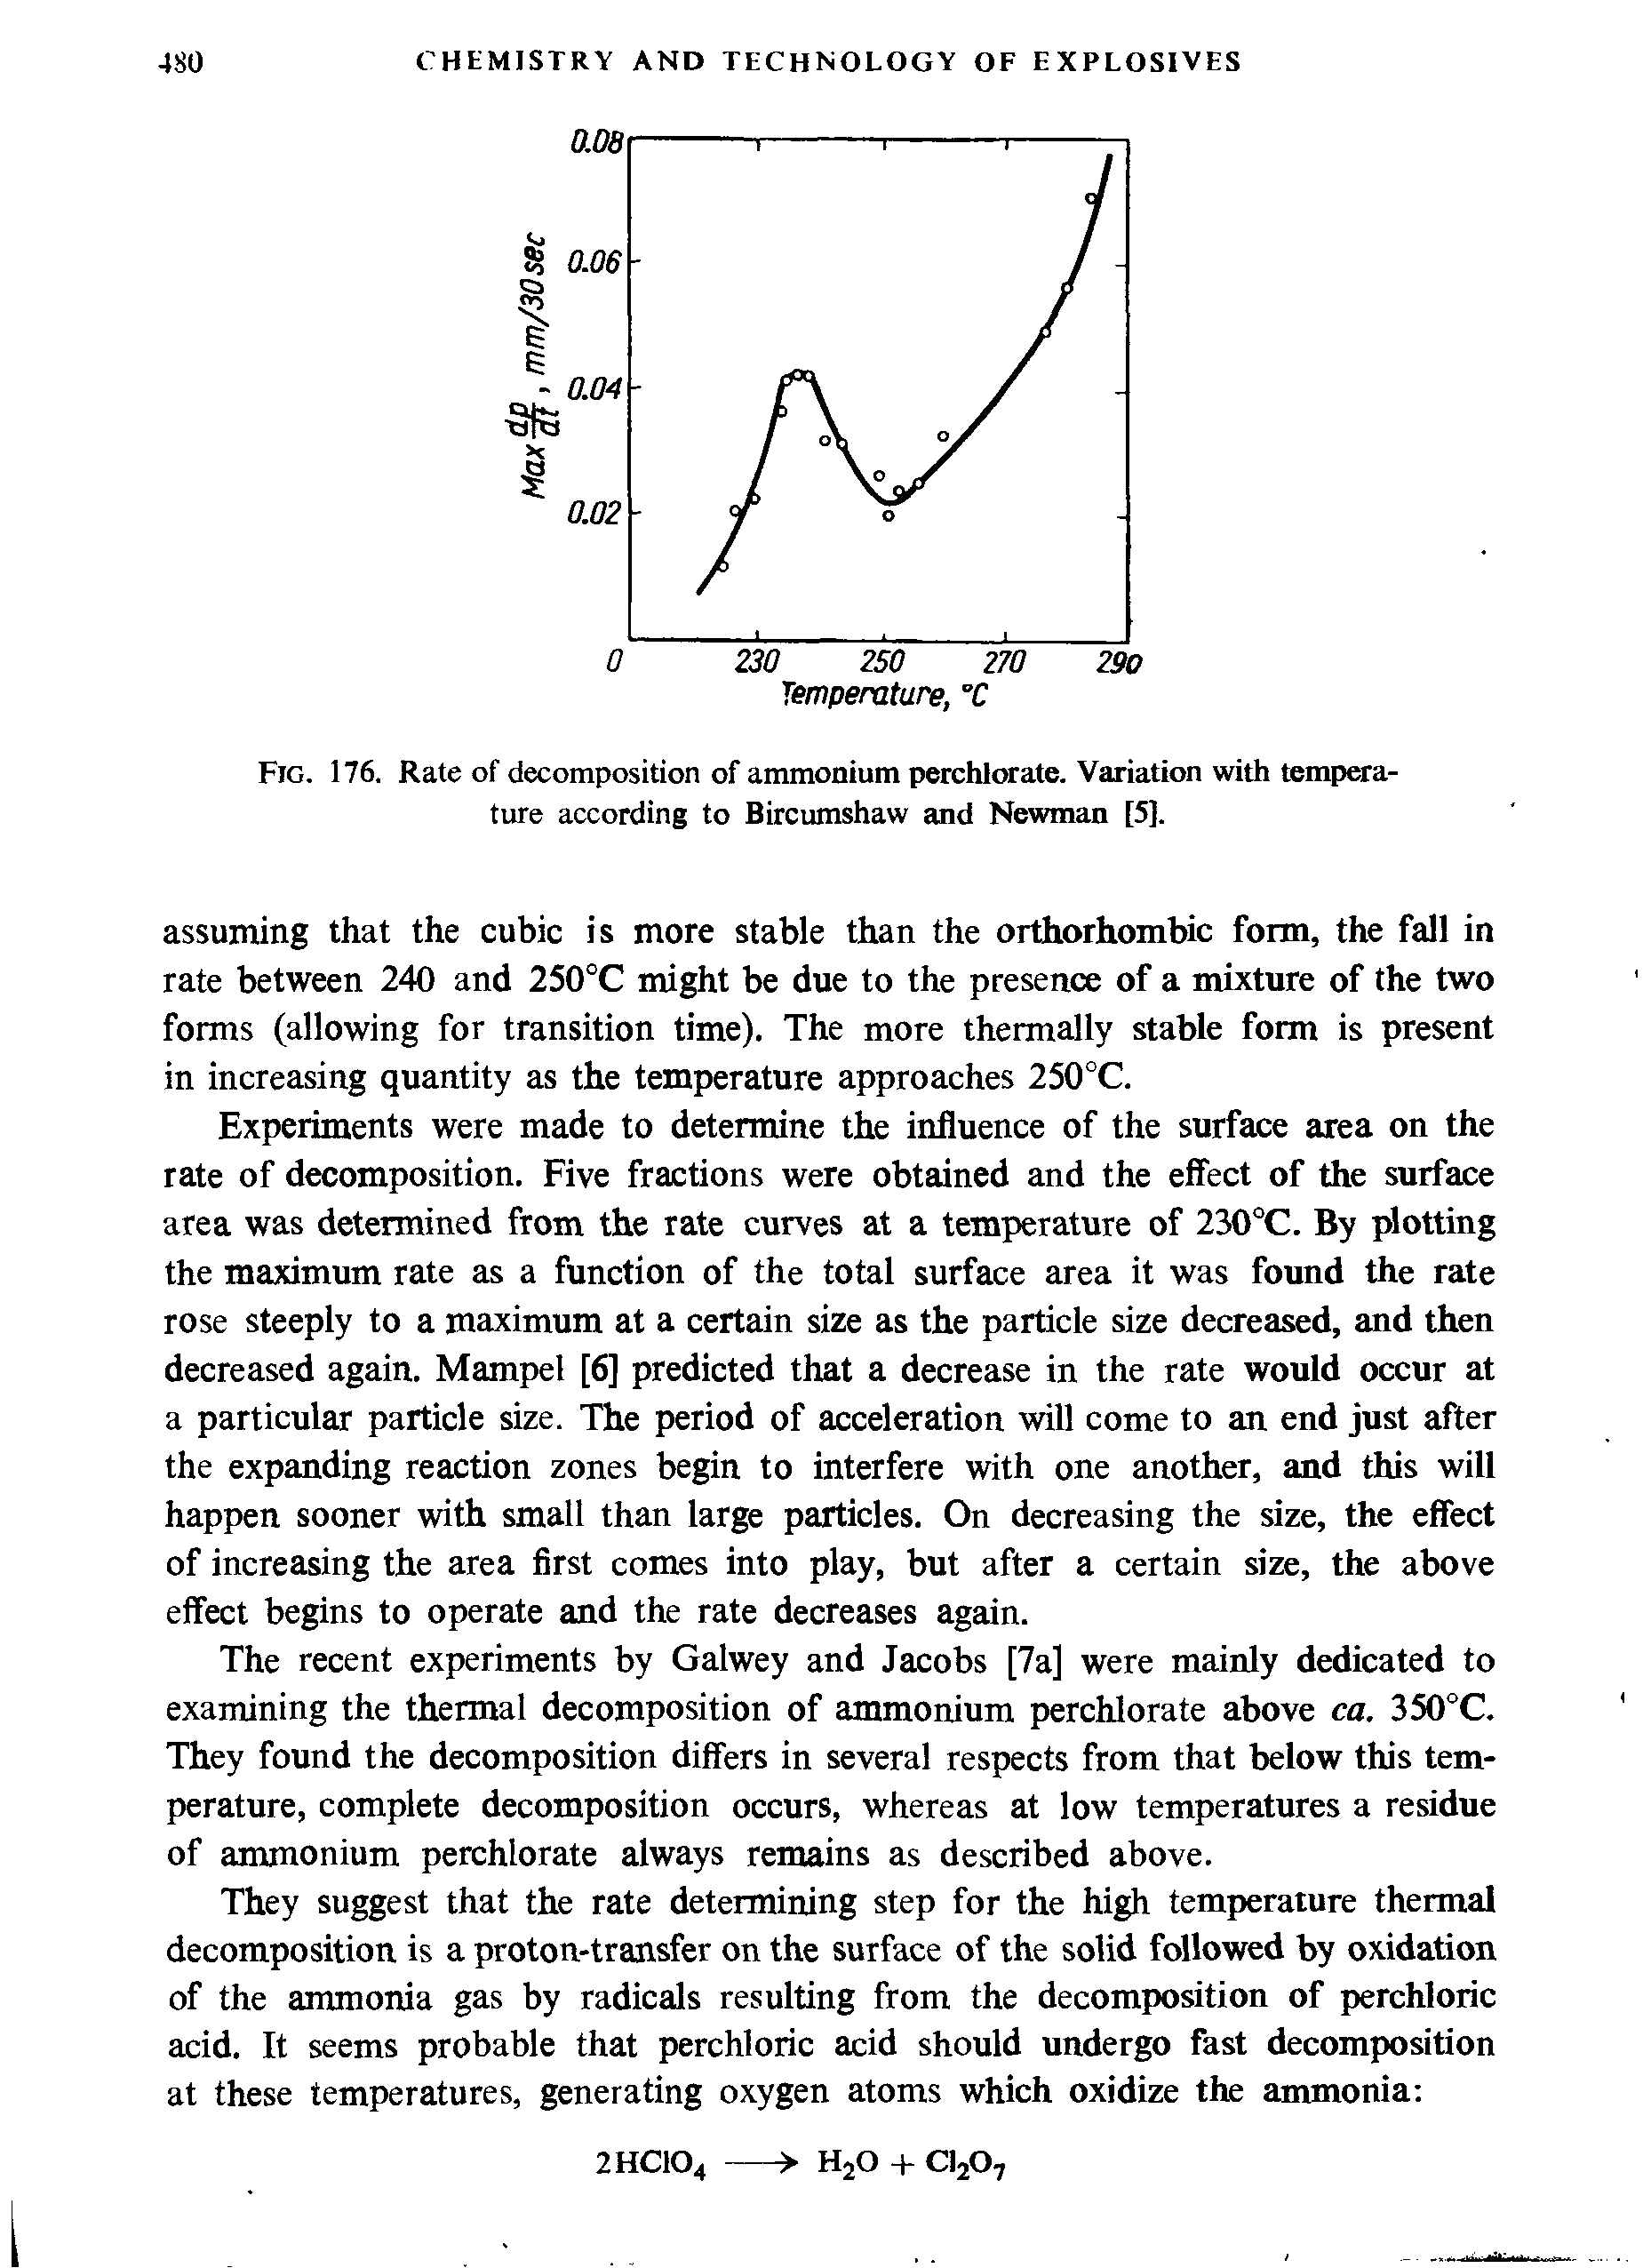 Fig. 176. Rate of decomposition of ammonium perchlorate. Variation with temperature according to Bircumshaw and Newman [5],...